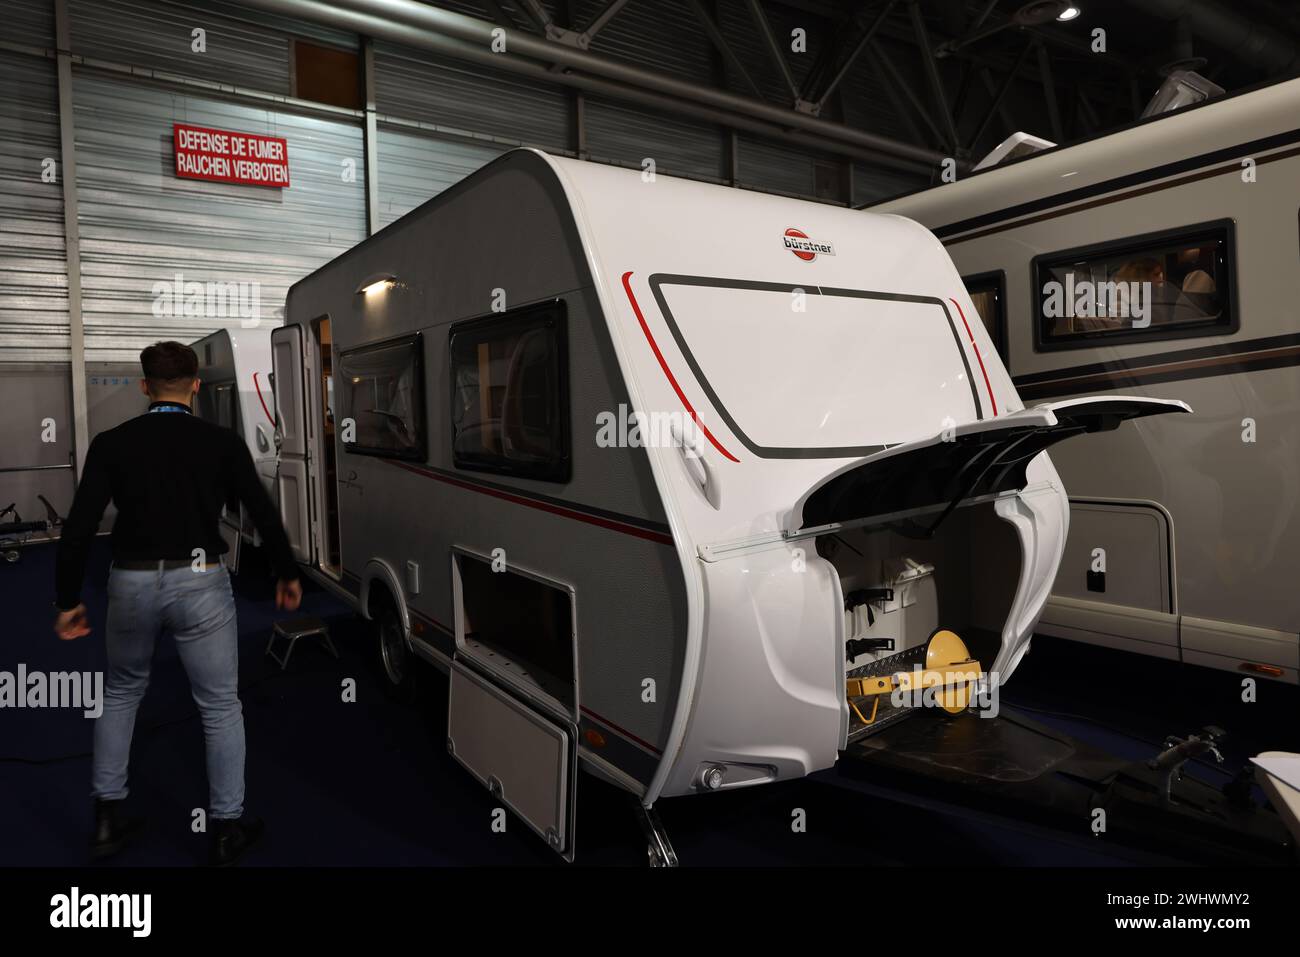 Camping car expo at the Parc Expo in Mulhouse, France. More than 150 motorhomes, vans, converted vans and caravans display for this occasion. Stock Photo